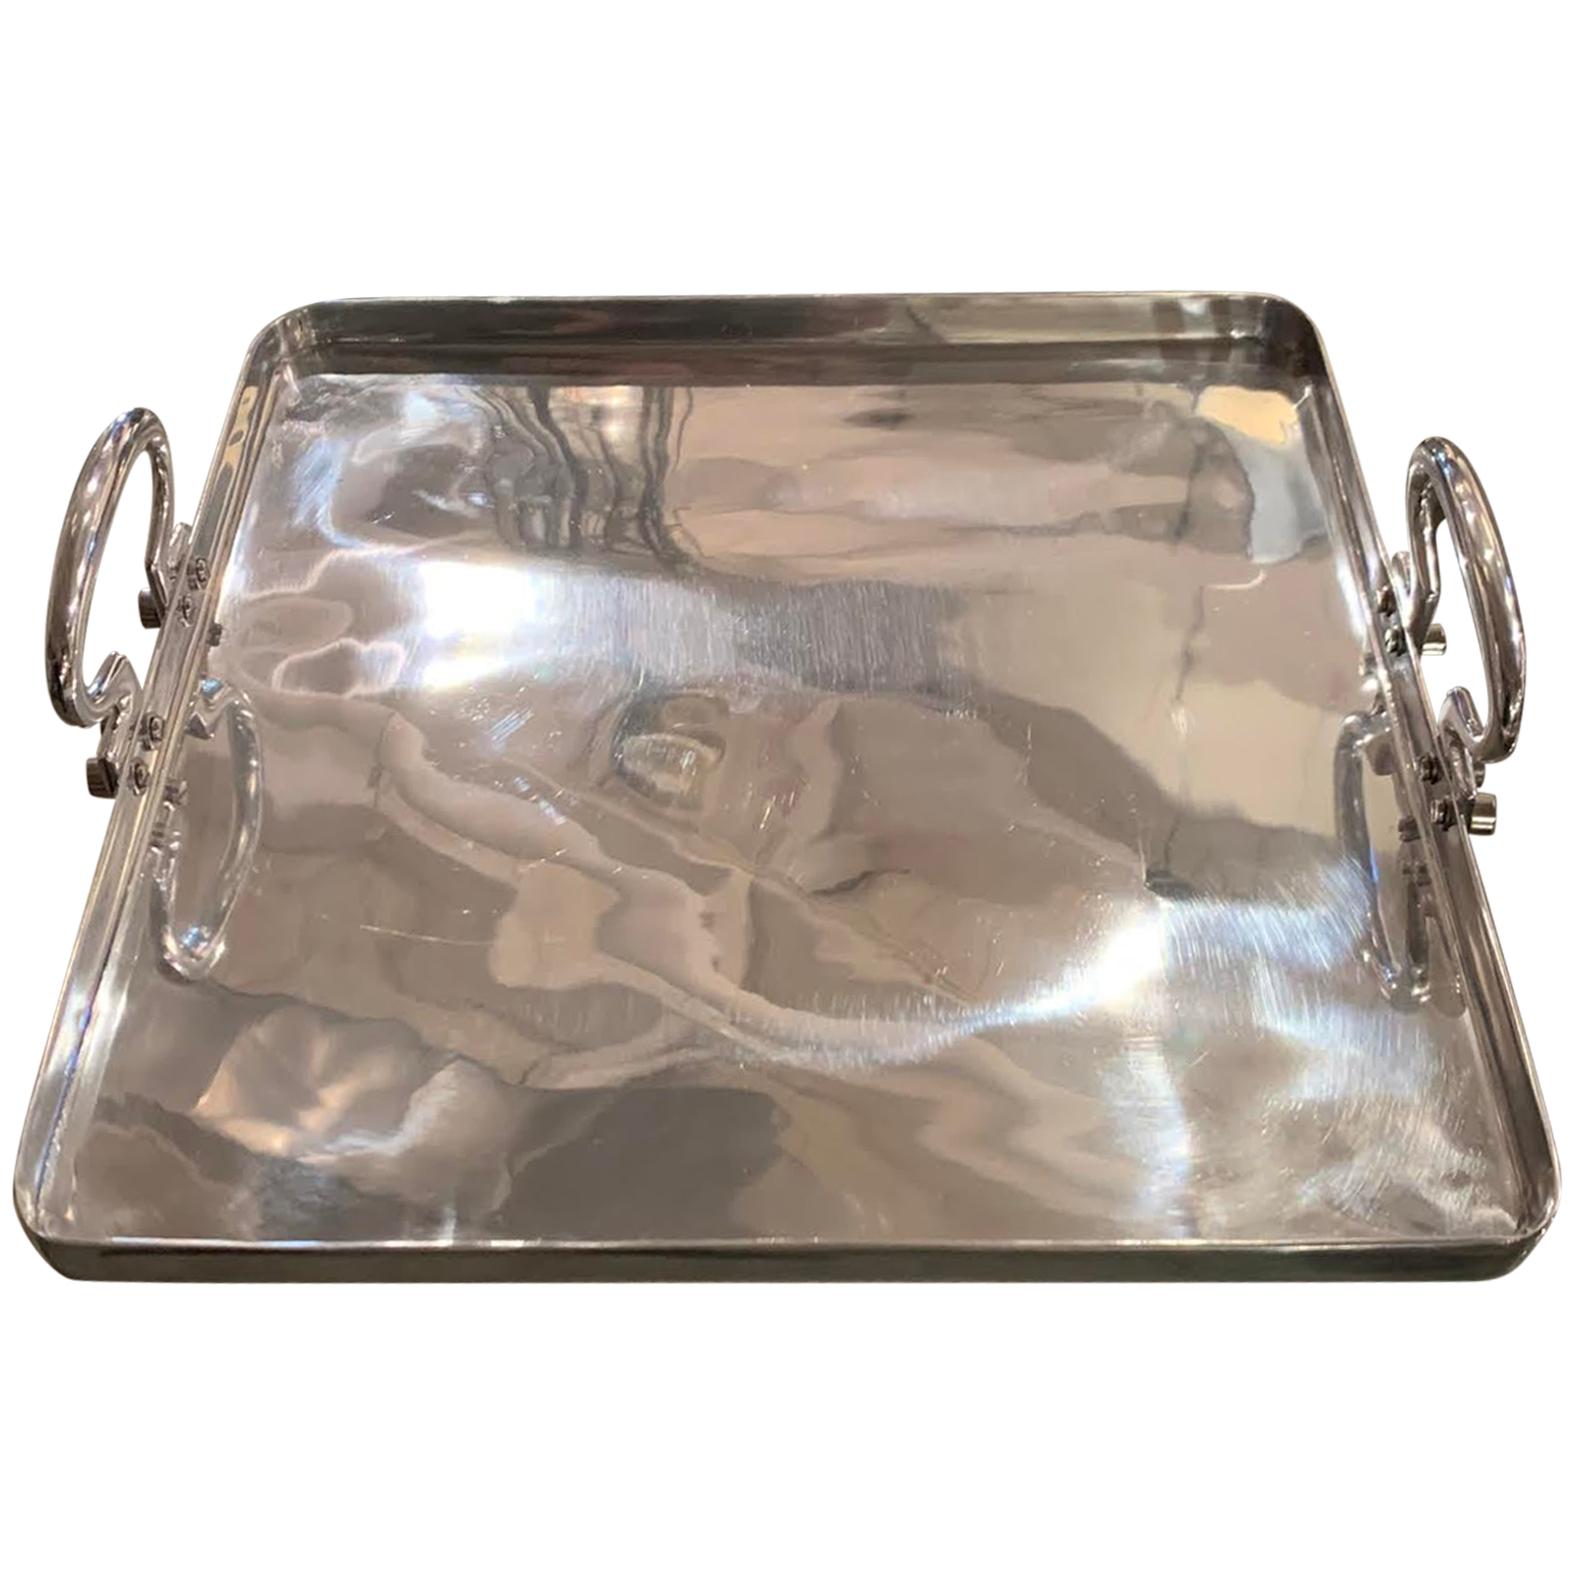 Square Aluminum Small Tray with Handles, Italy, Contemporary